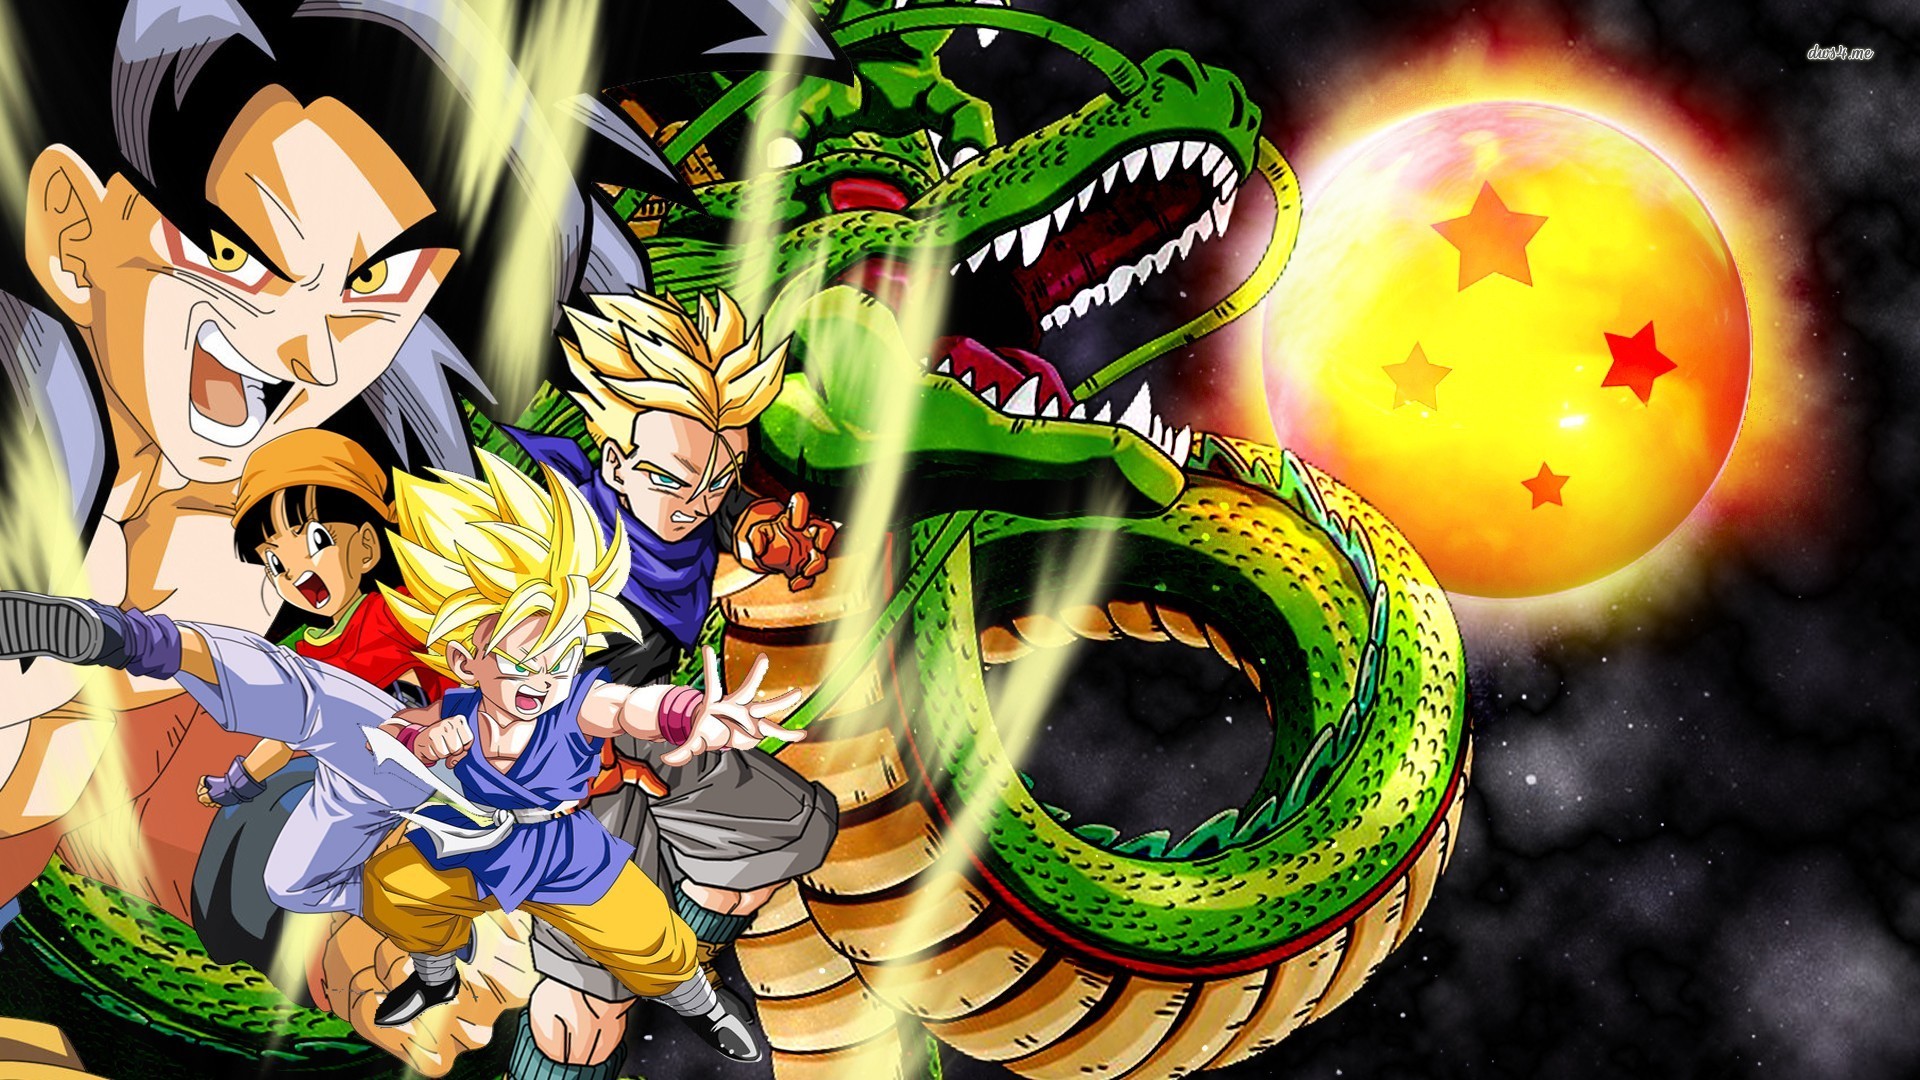 Free Download Dragon Ball Gt Wallpaper 19x1080 For Your Desktop Mobile Tablet Explore 76 Dragonball Gt Wallpapers Dragonball Gt Wallpapers Dragonball Gt Wallpaper Wallpaper Dragonball